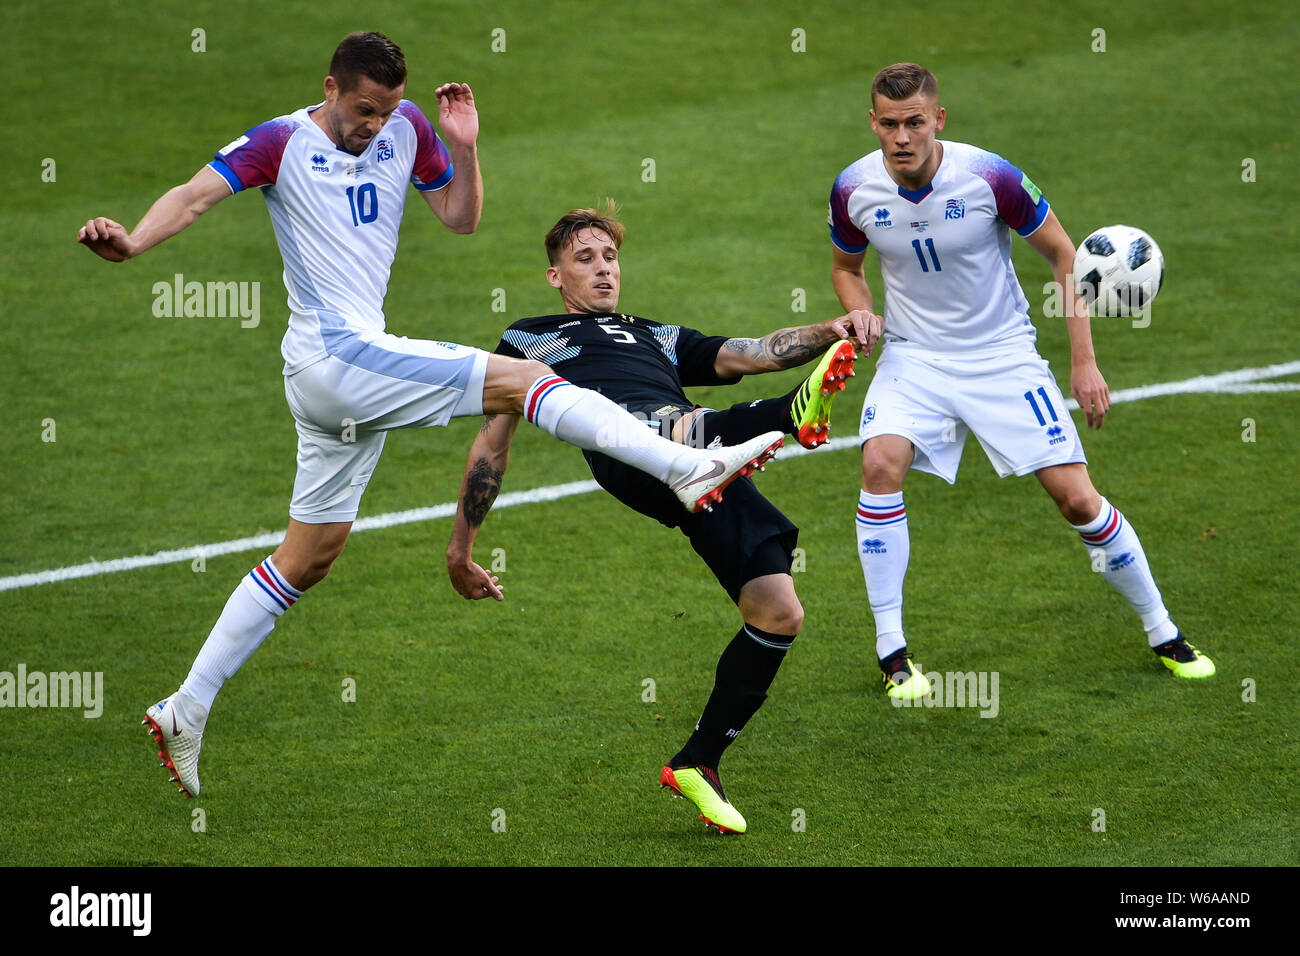 Lucas Biglia of Argentina, center, challenges Gylfi Sigurdsson, left, of Iceland in their Group D match during the FIFA World Cup 2018 in Moscow, Russ Stock Photo